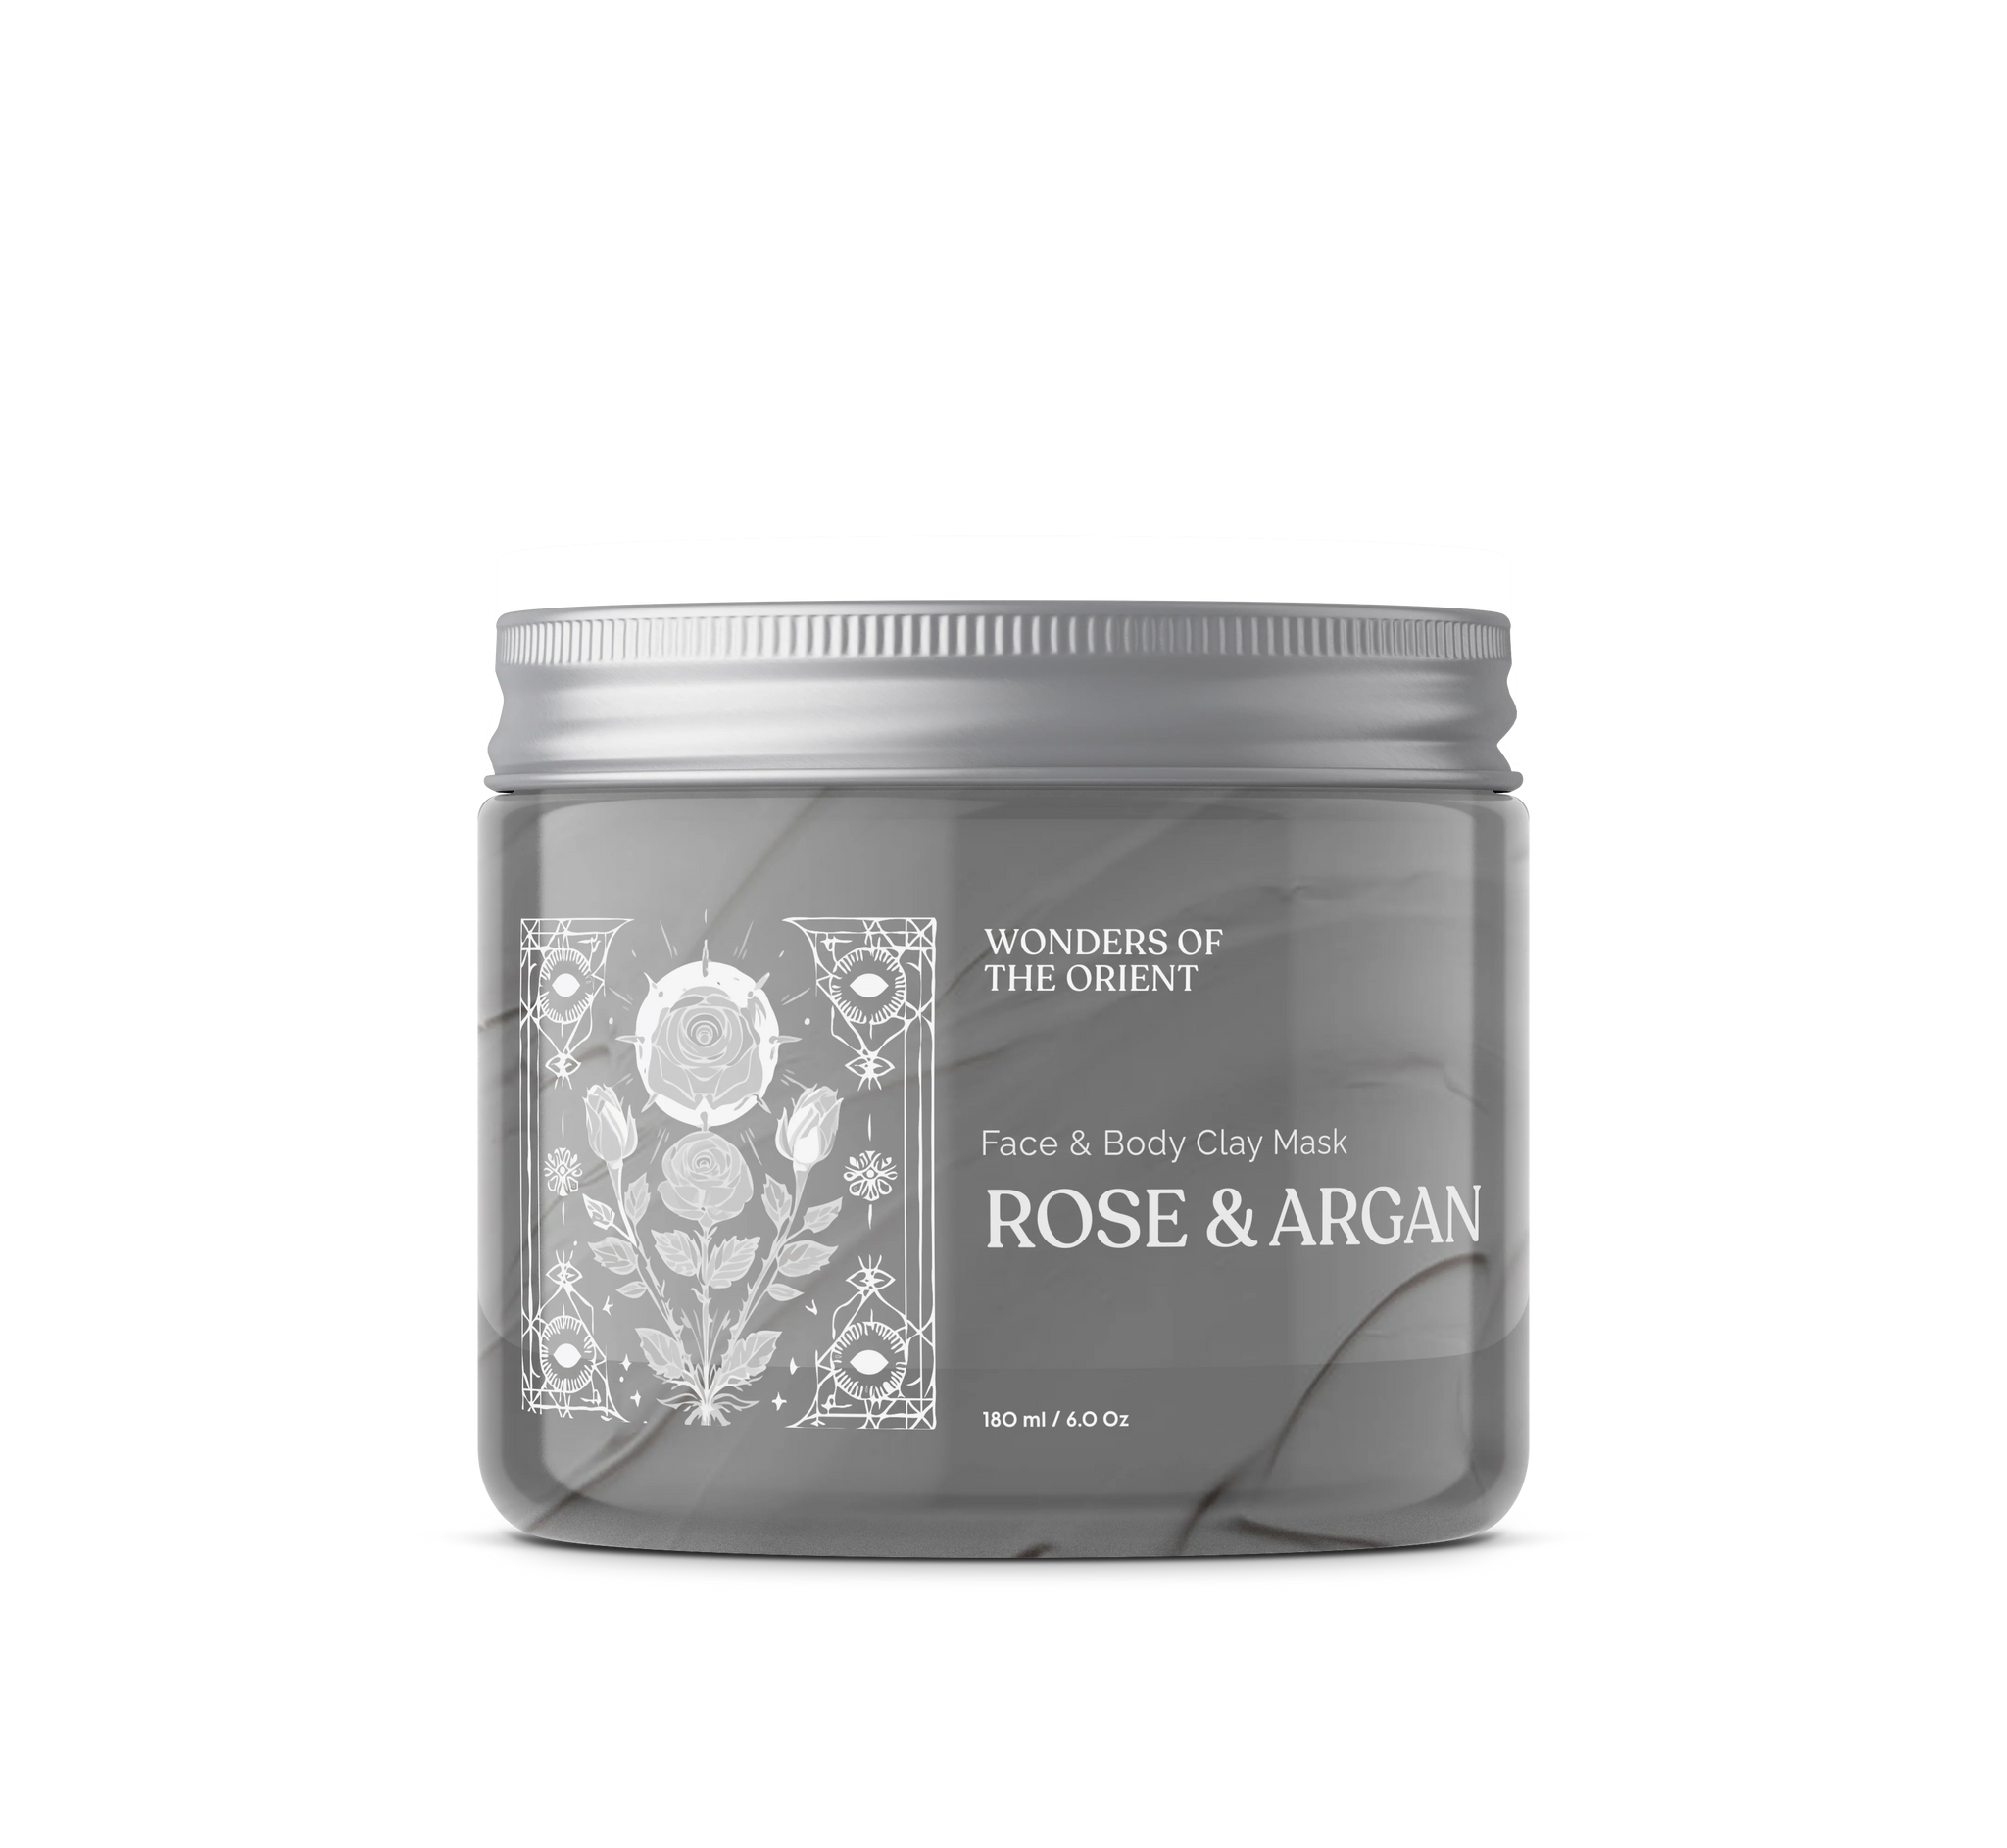 Rose & Argan Face and Body Clay Mask